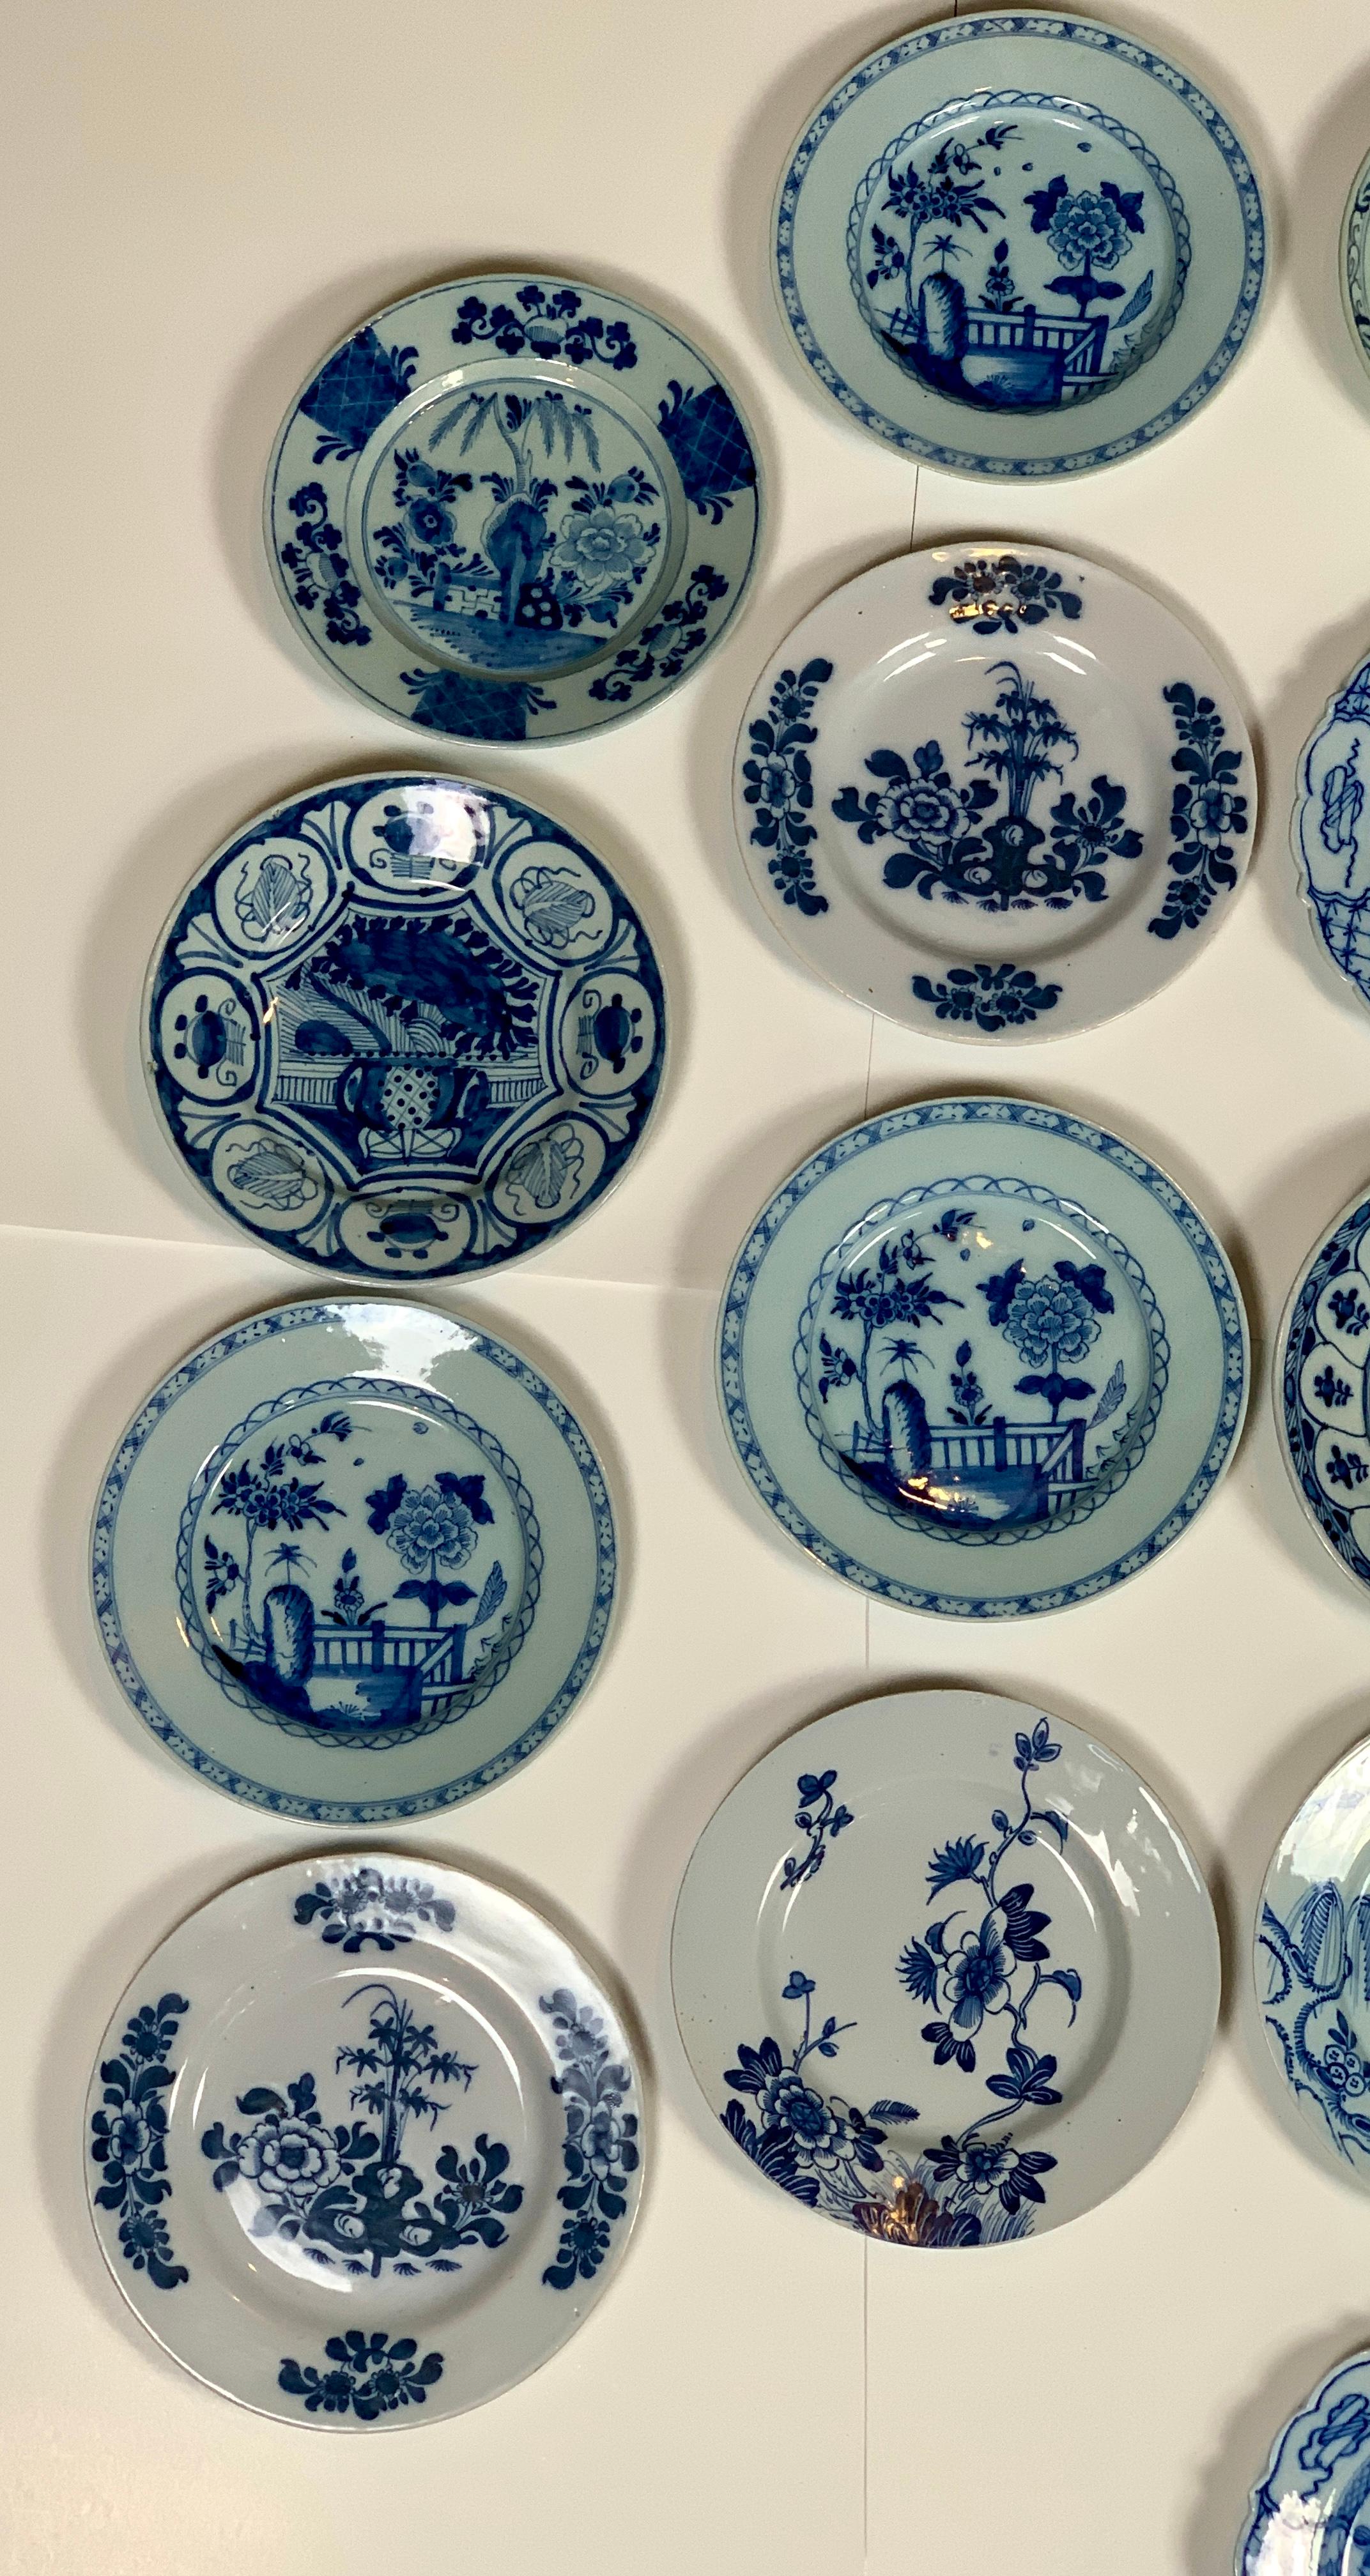 A set of 21 blue and white Delft plates 8.75-9.25